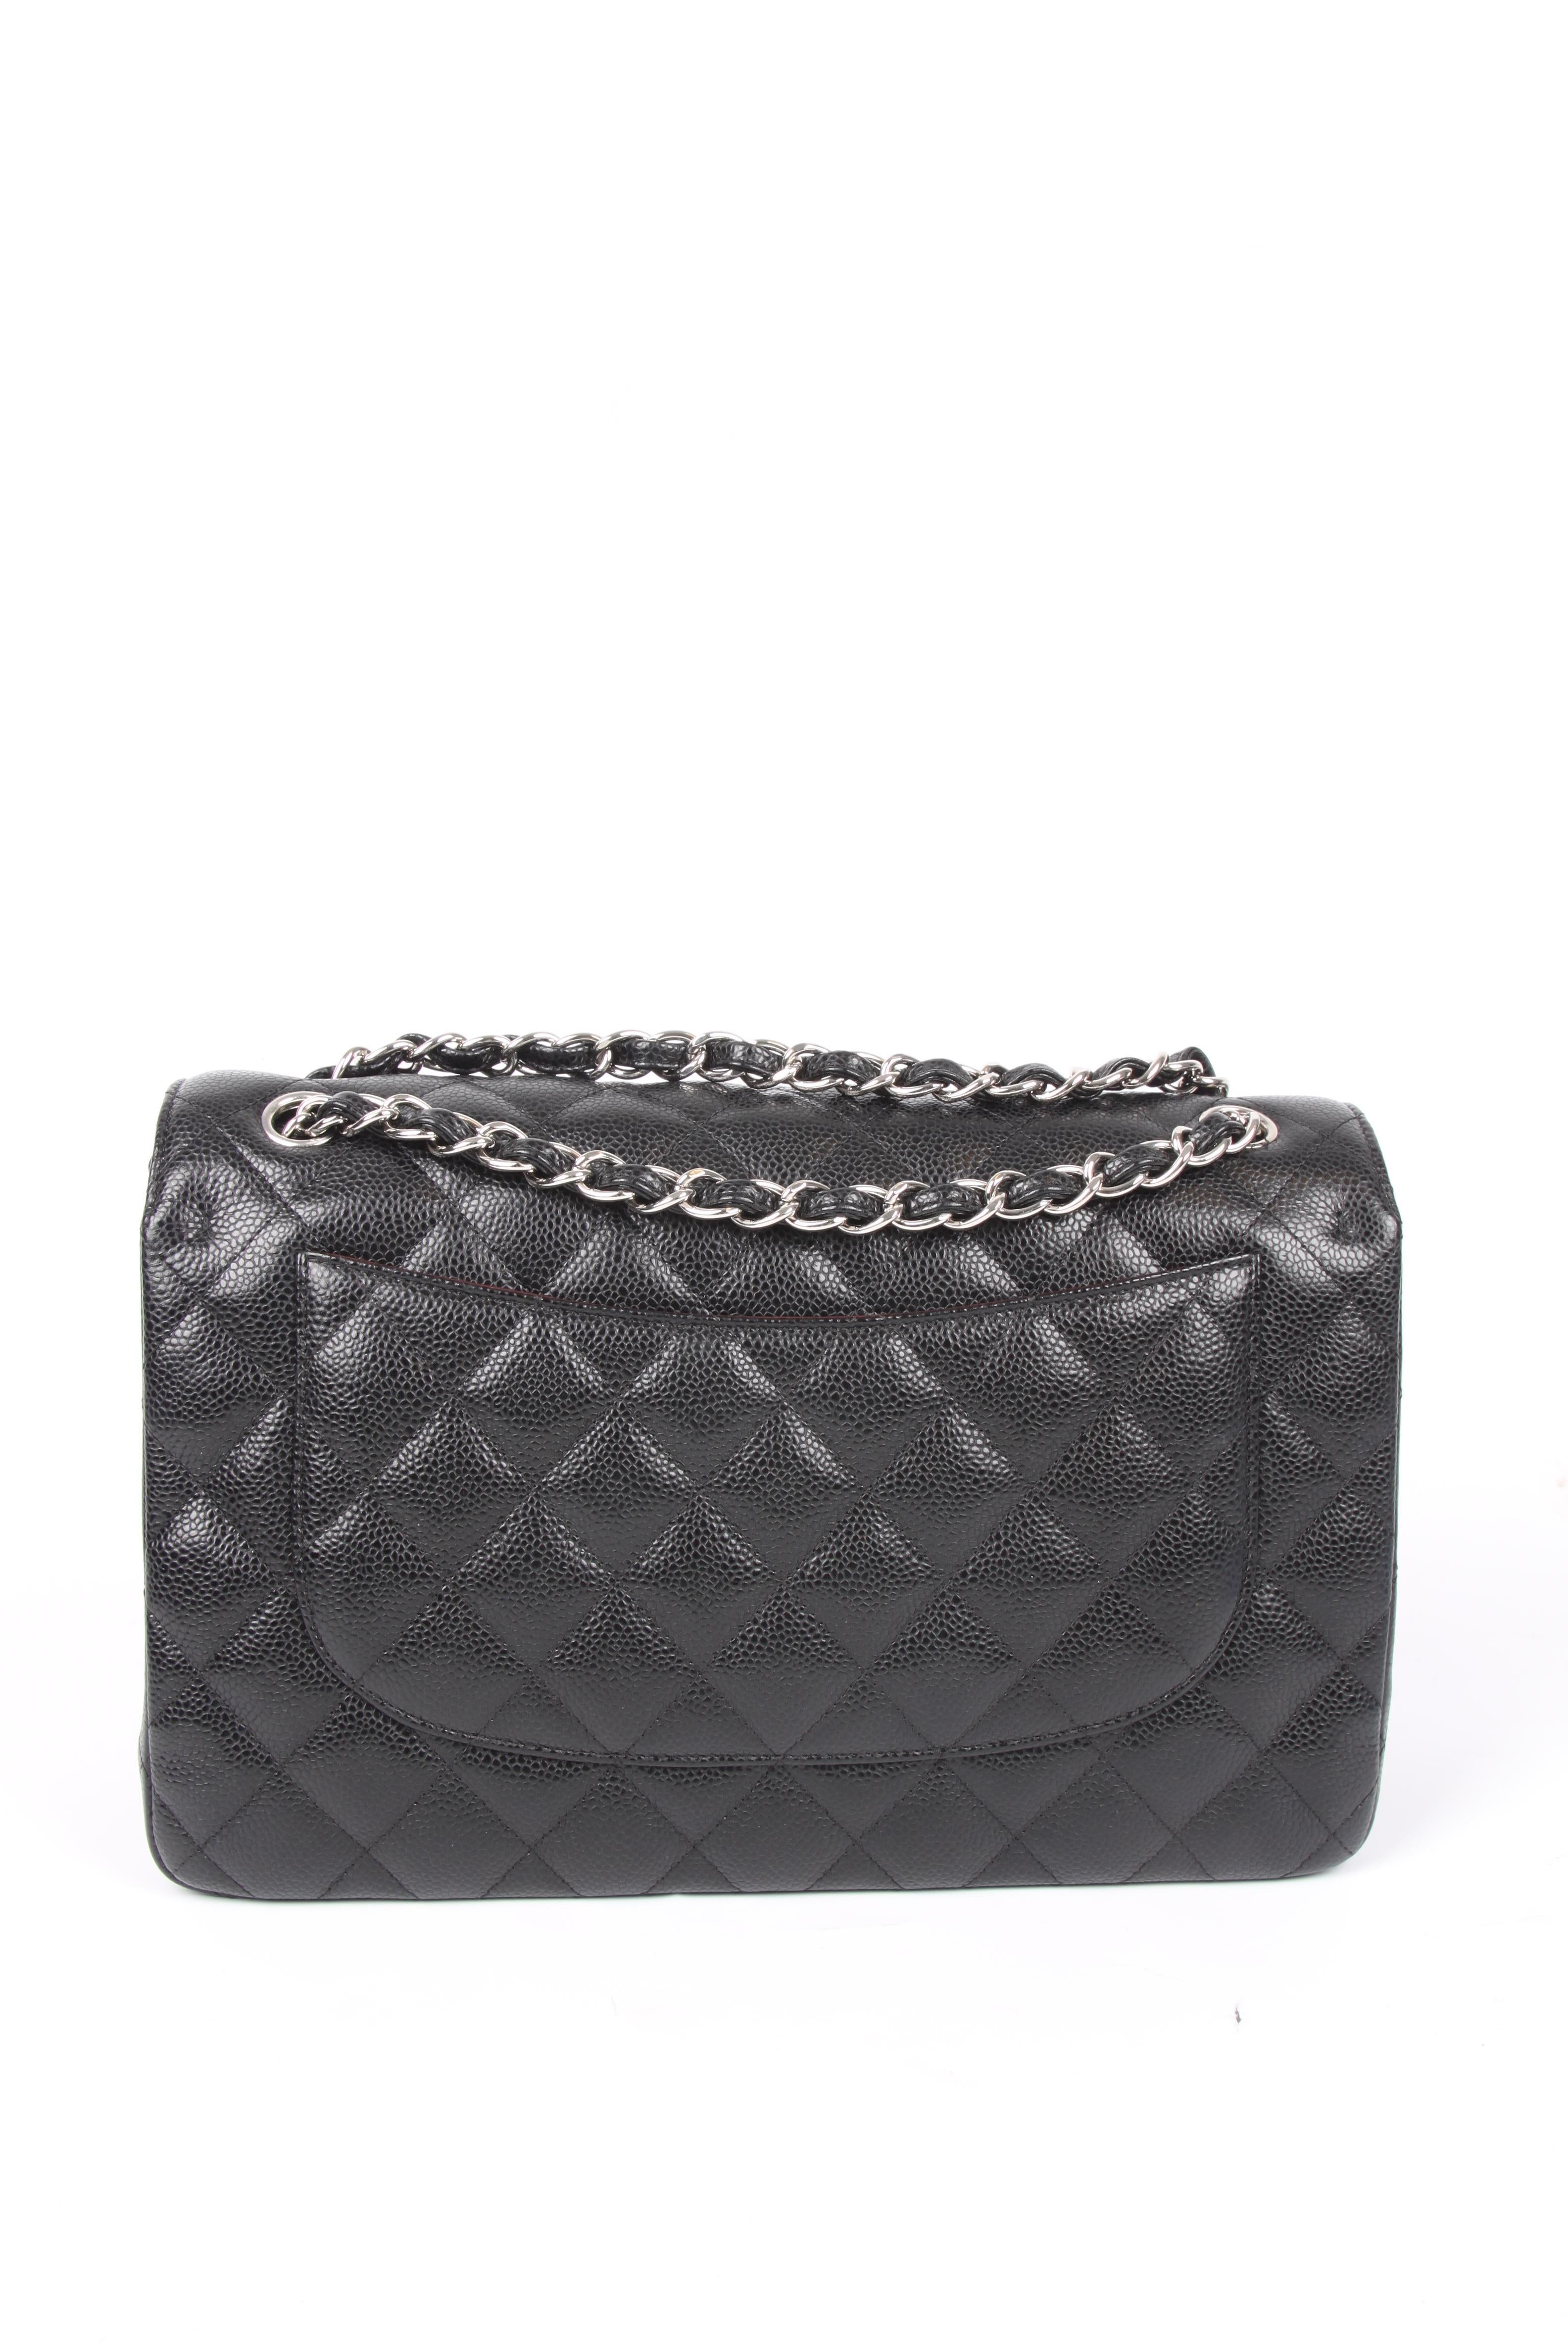 Chanel 2.55 Timeless Jumbo Double Flap Bag - black caviar leather/silver In Excellent Condition In Baarn, NL